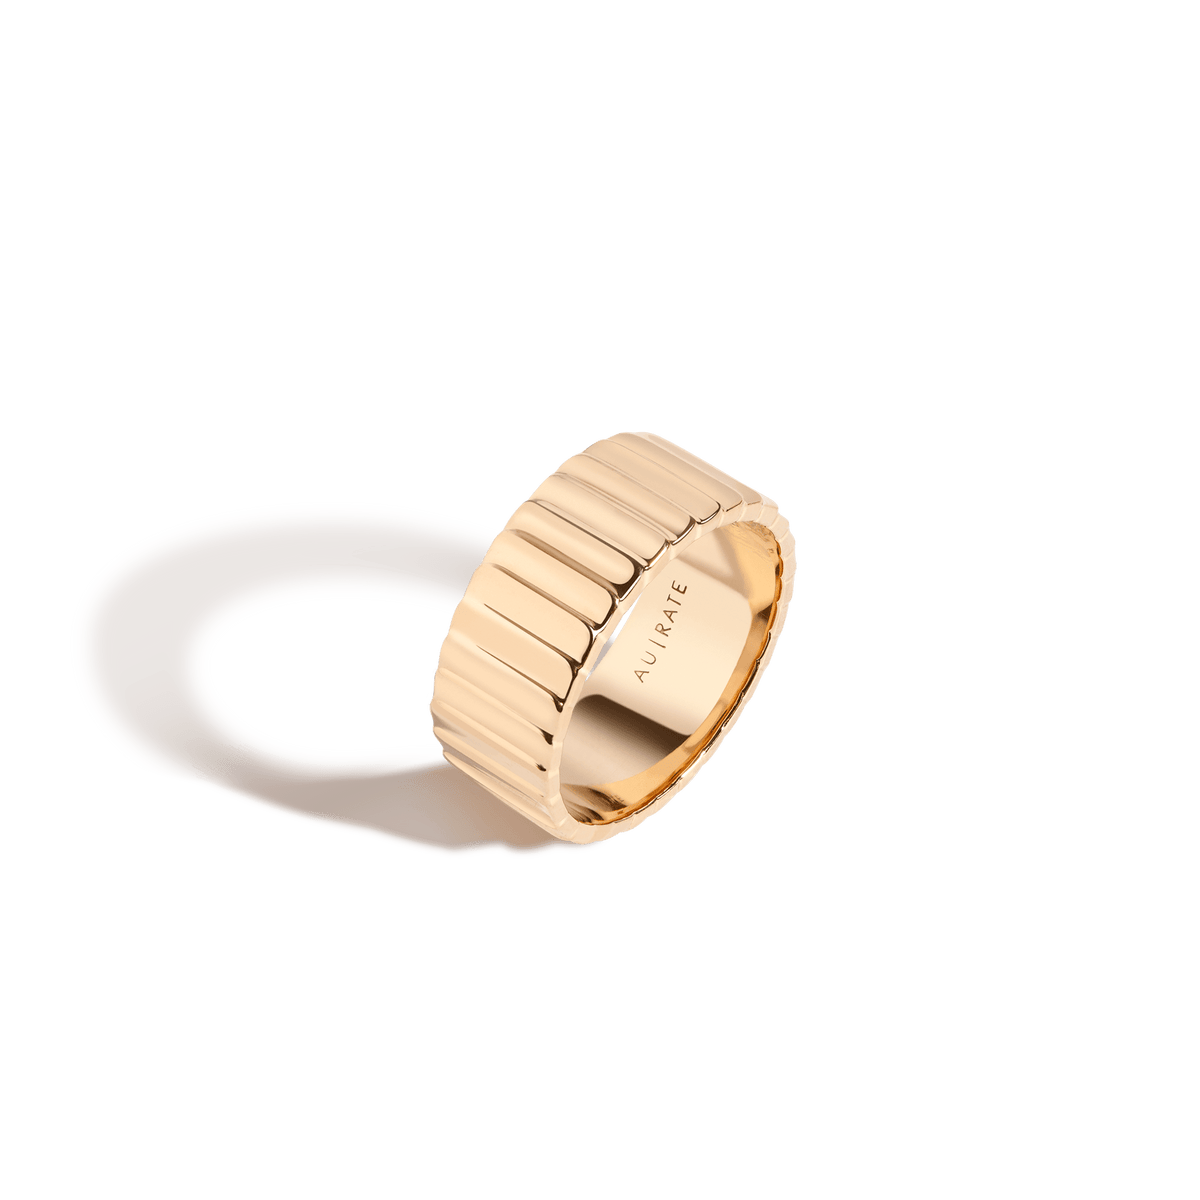 Fashionable standard snap ring from Leading Suppliers 